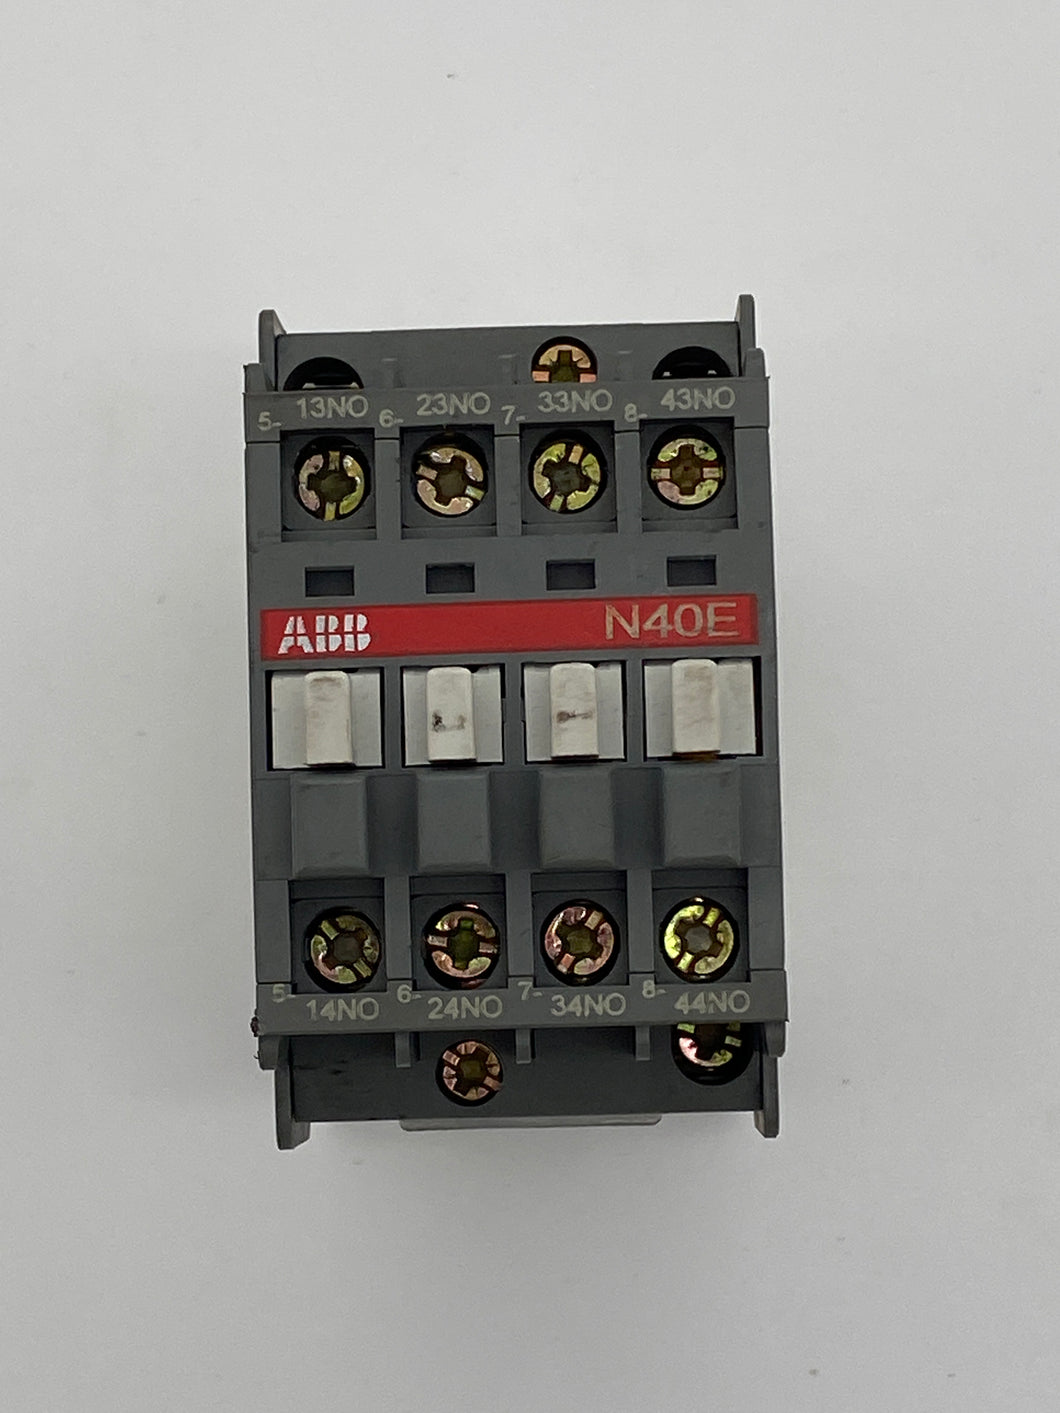 ABB N40E Contactor Relay, 110-115V, 50Hz / 115-127V 60Hz, *Lot of (2) Relays* (Used)